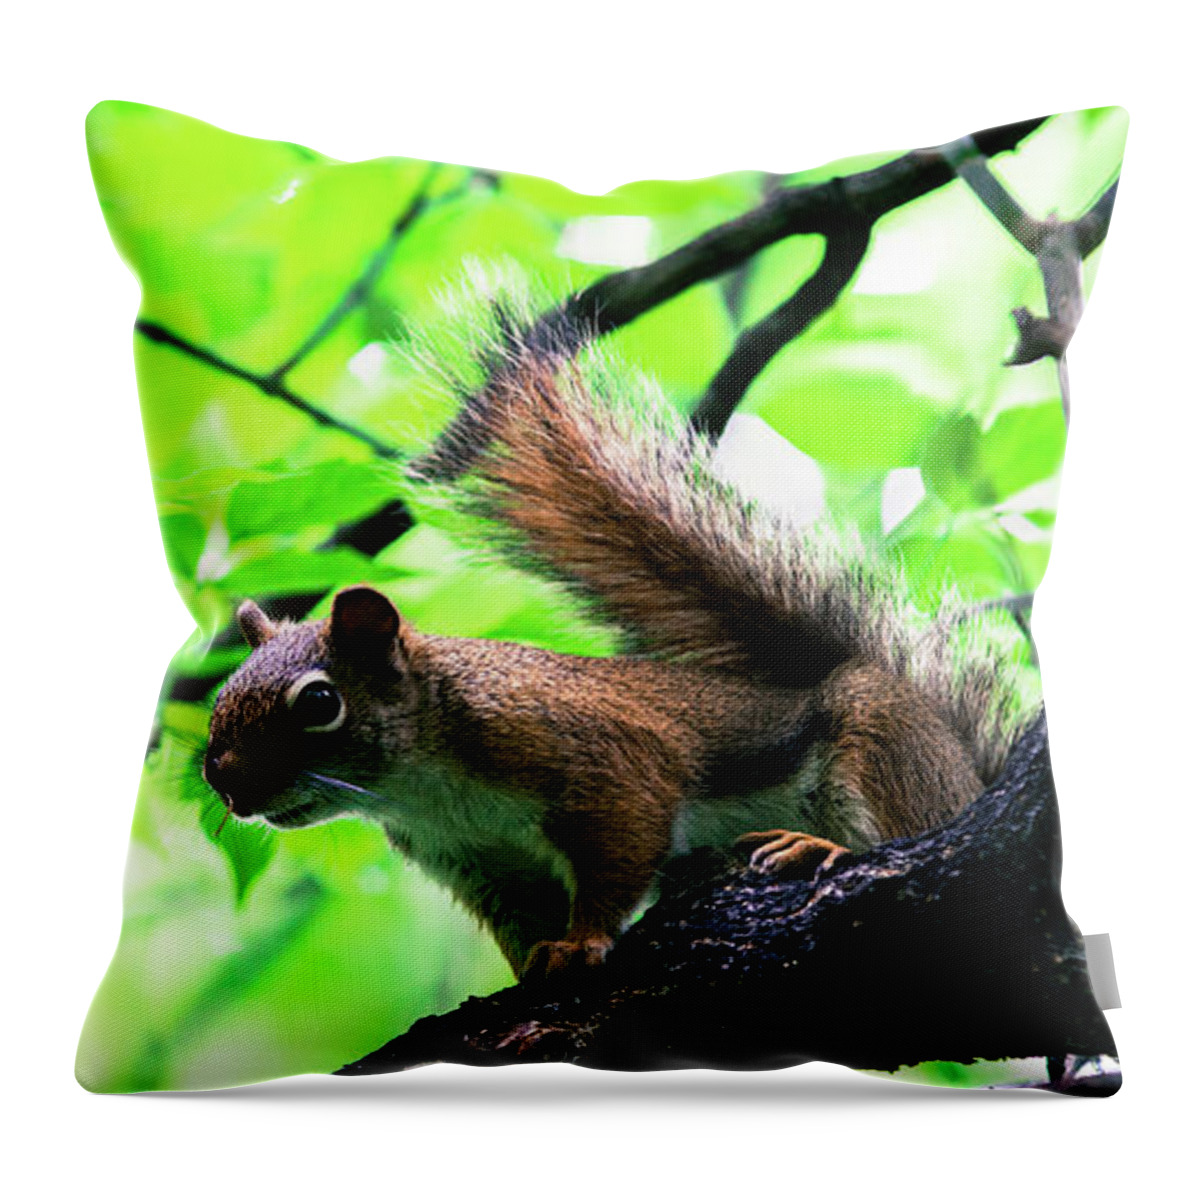 This Beauty Was Spotted In The Mint Forest Located In Southdale Throw Pillow featuring the photograph Prairie Country #4 by FANKS Photography